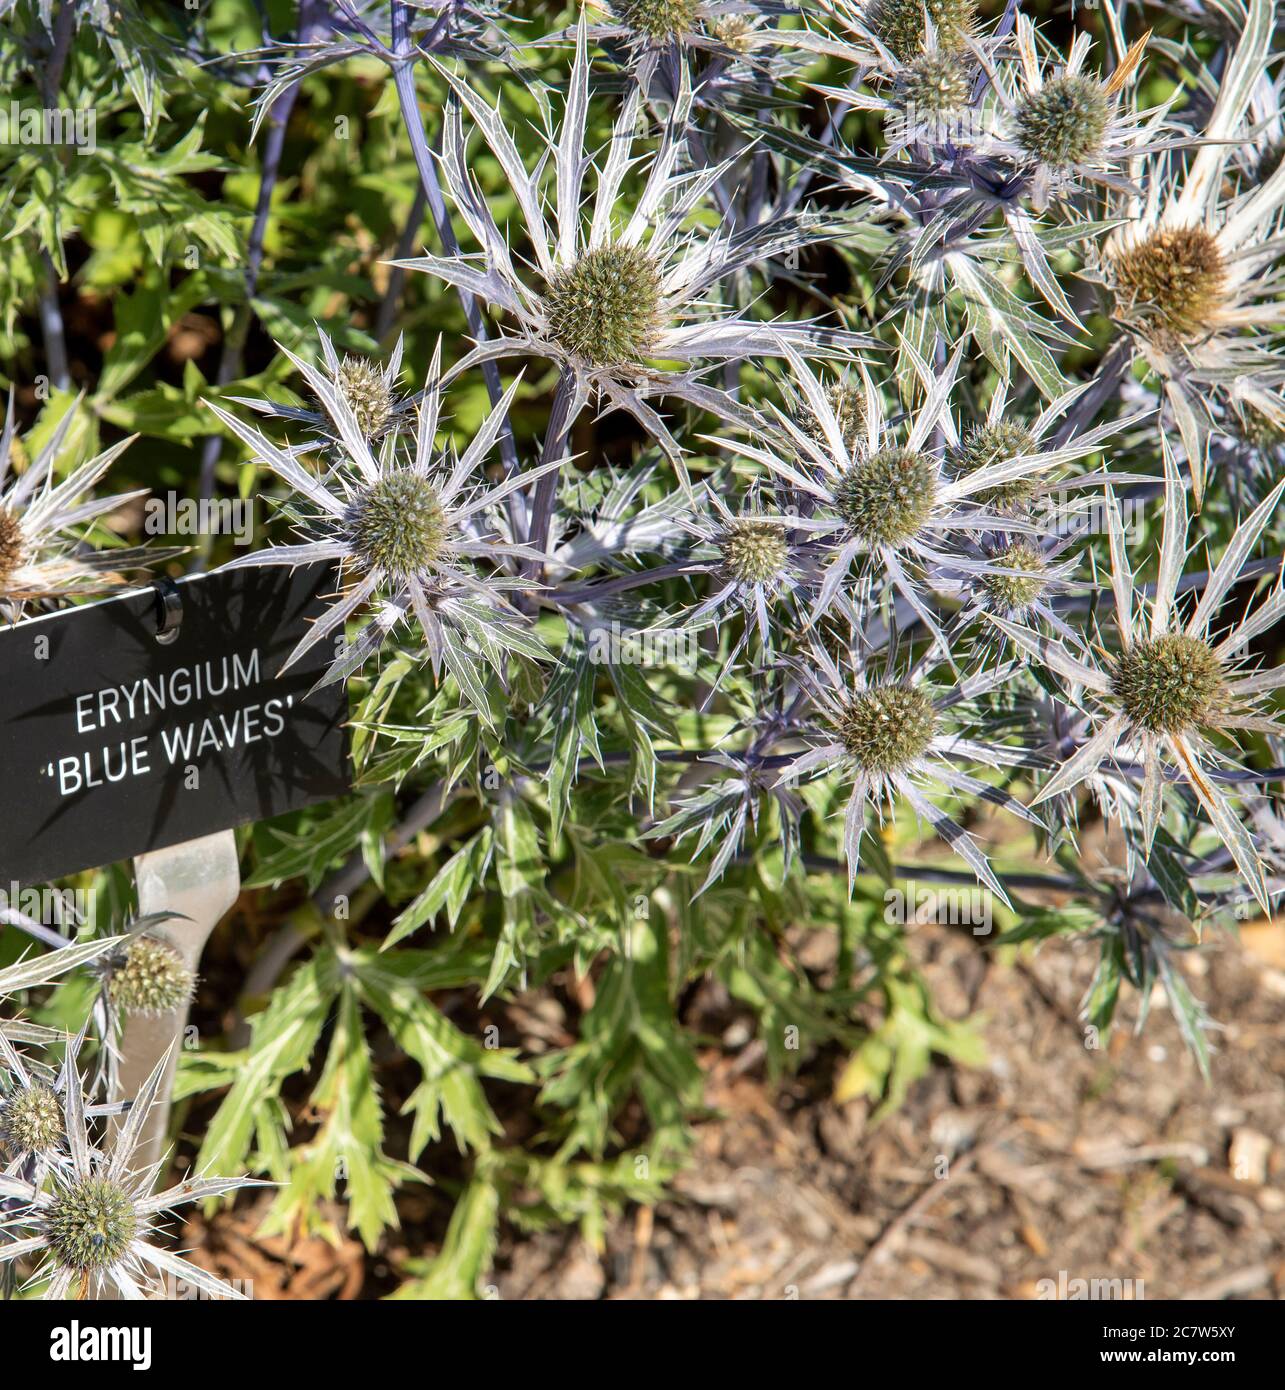 Hampshire, England, UK. 2020. Eryngium 'Blue Waves' in bloom with an identity label. English country garden Stock Photo